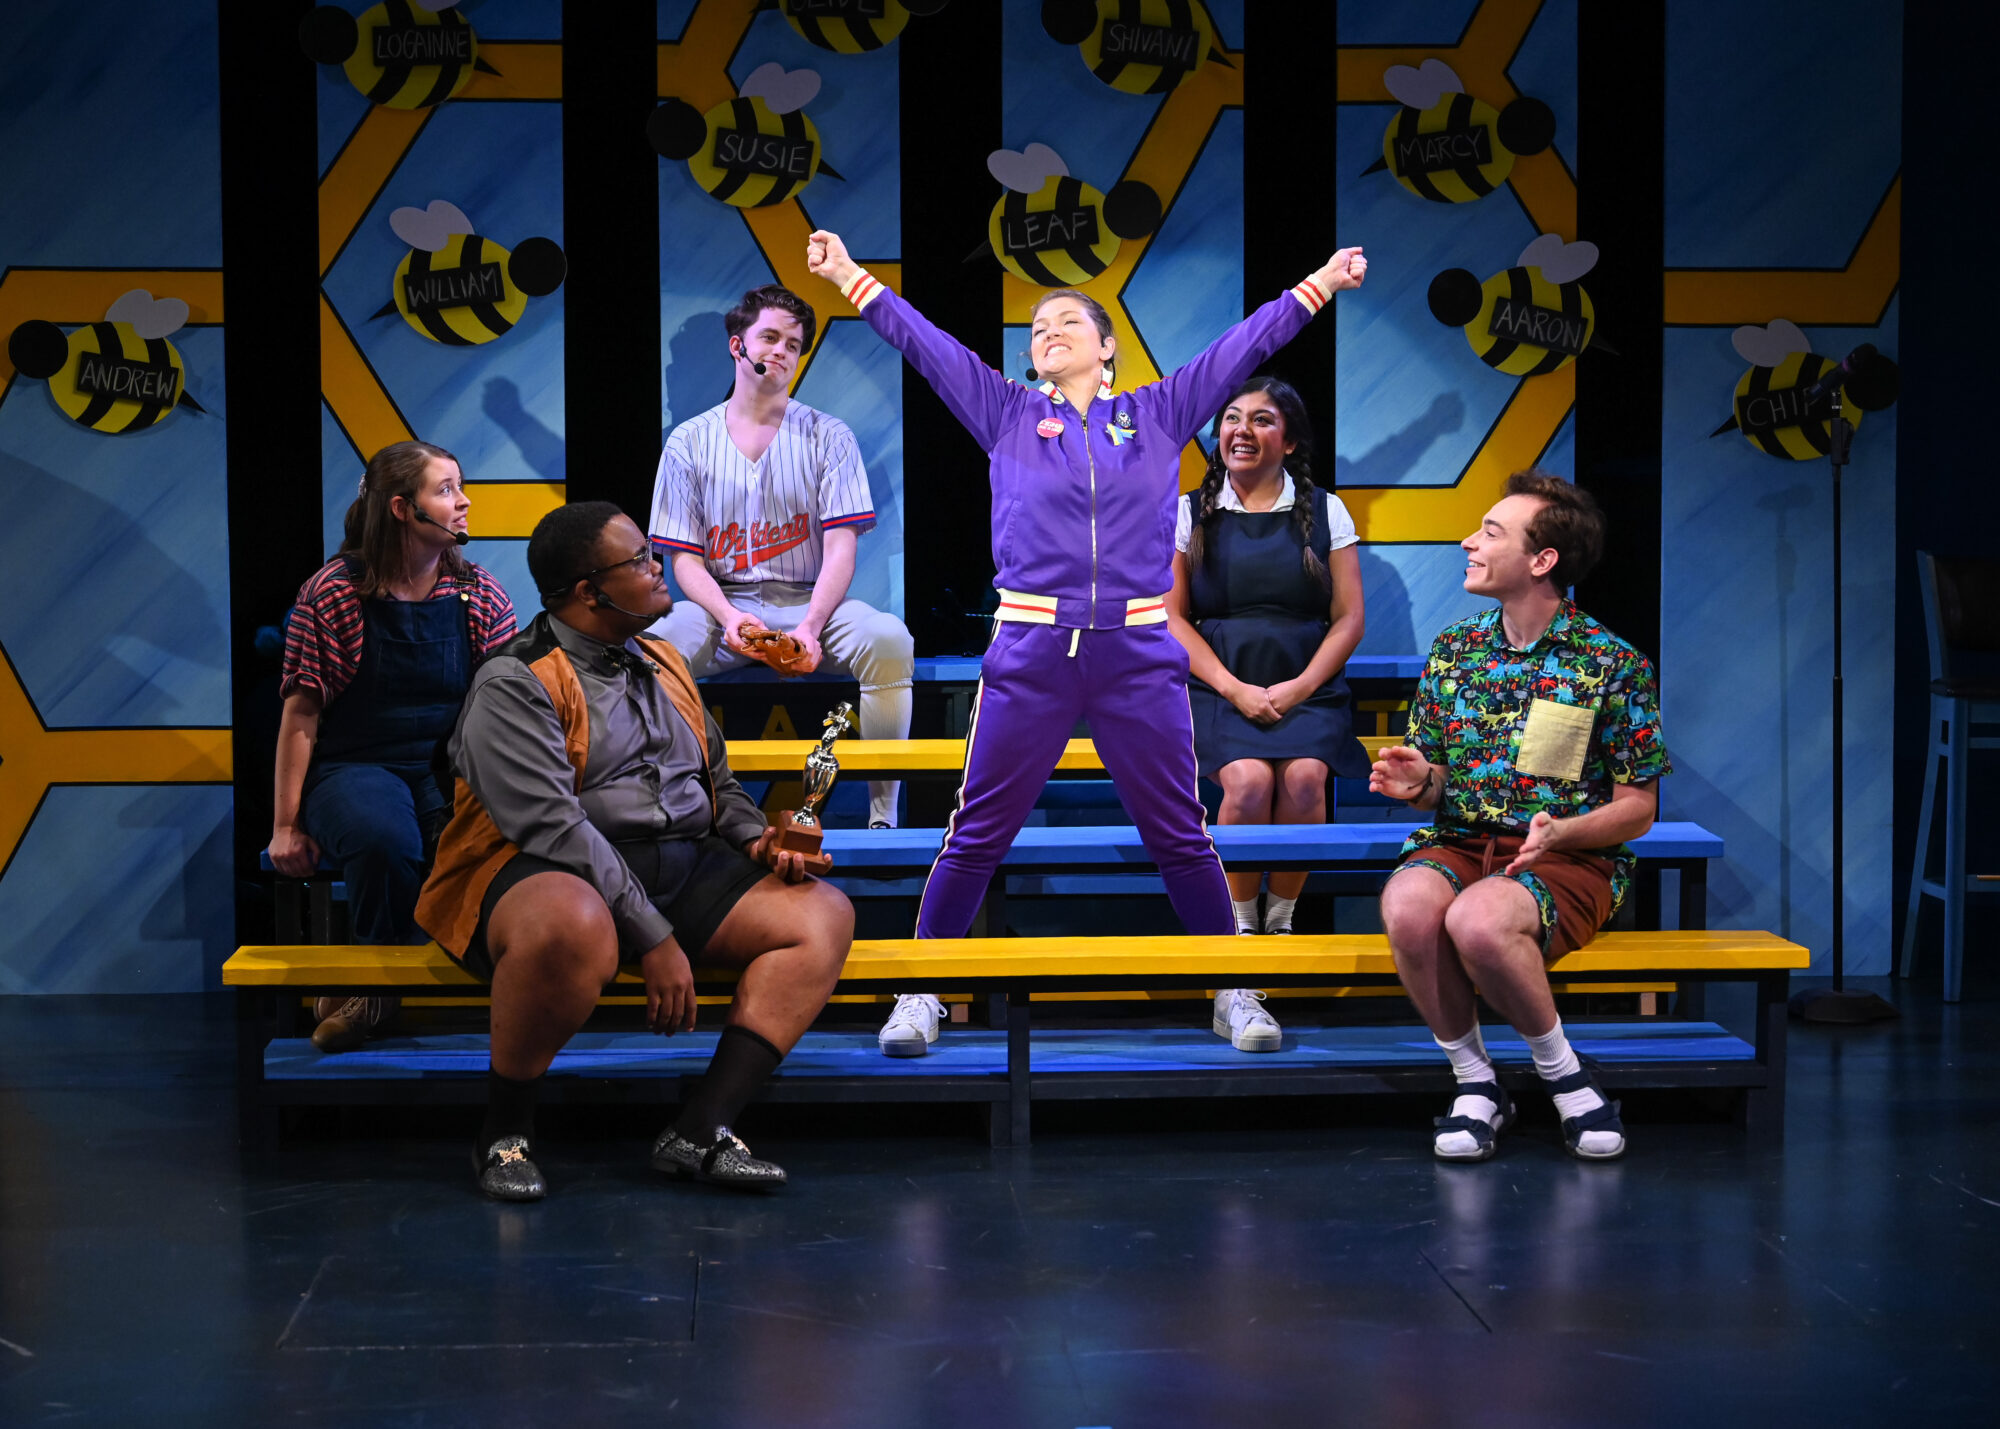 BWW Review: Warehouse Theatre’s THE 25TH ANNUAL PUTNAM COUNTY SPELLING BEE is Pure Joy